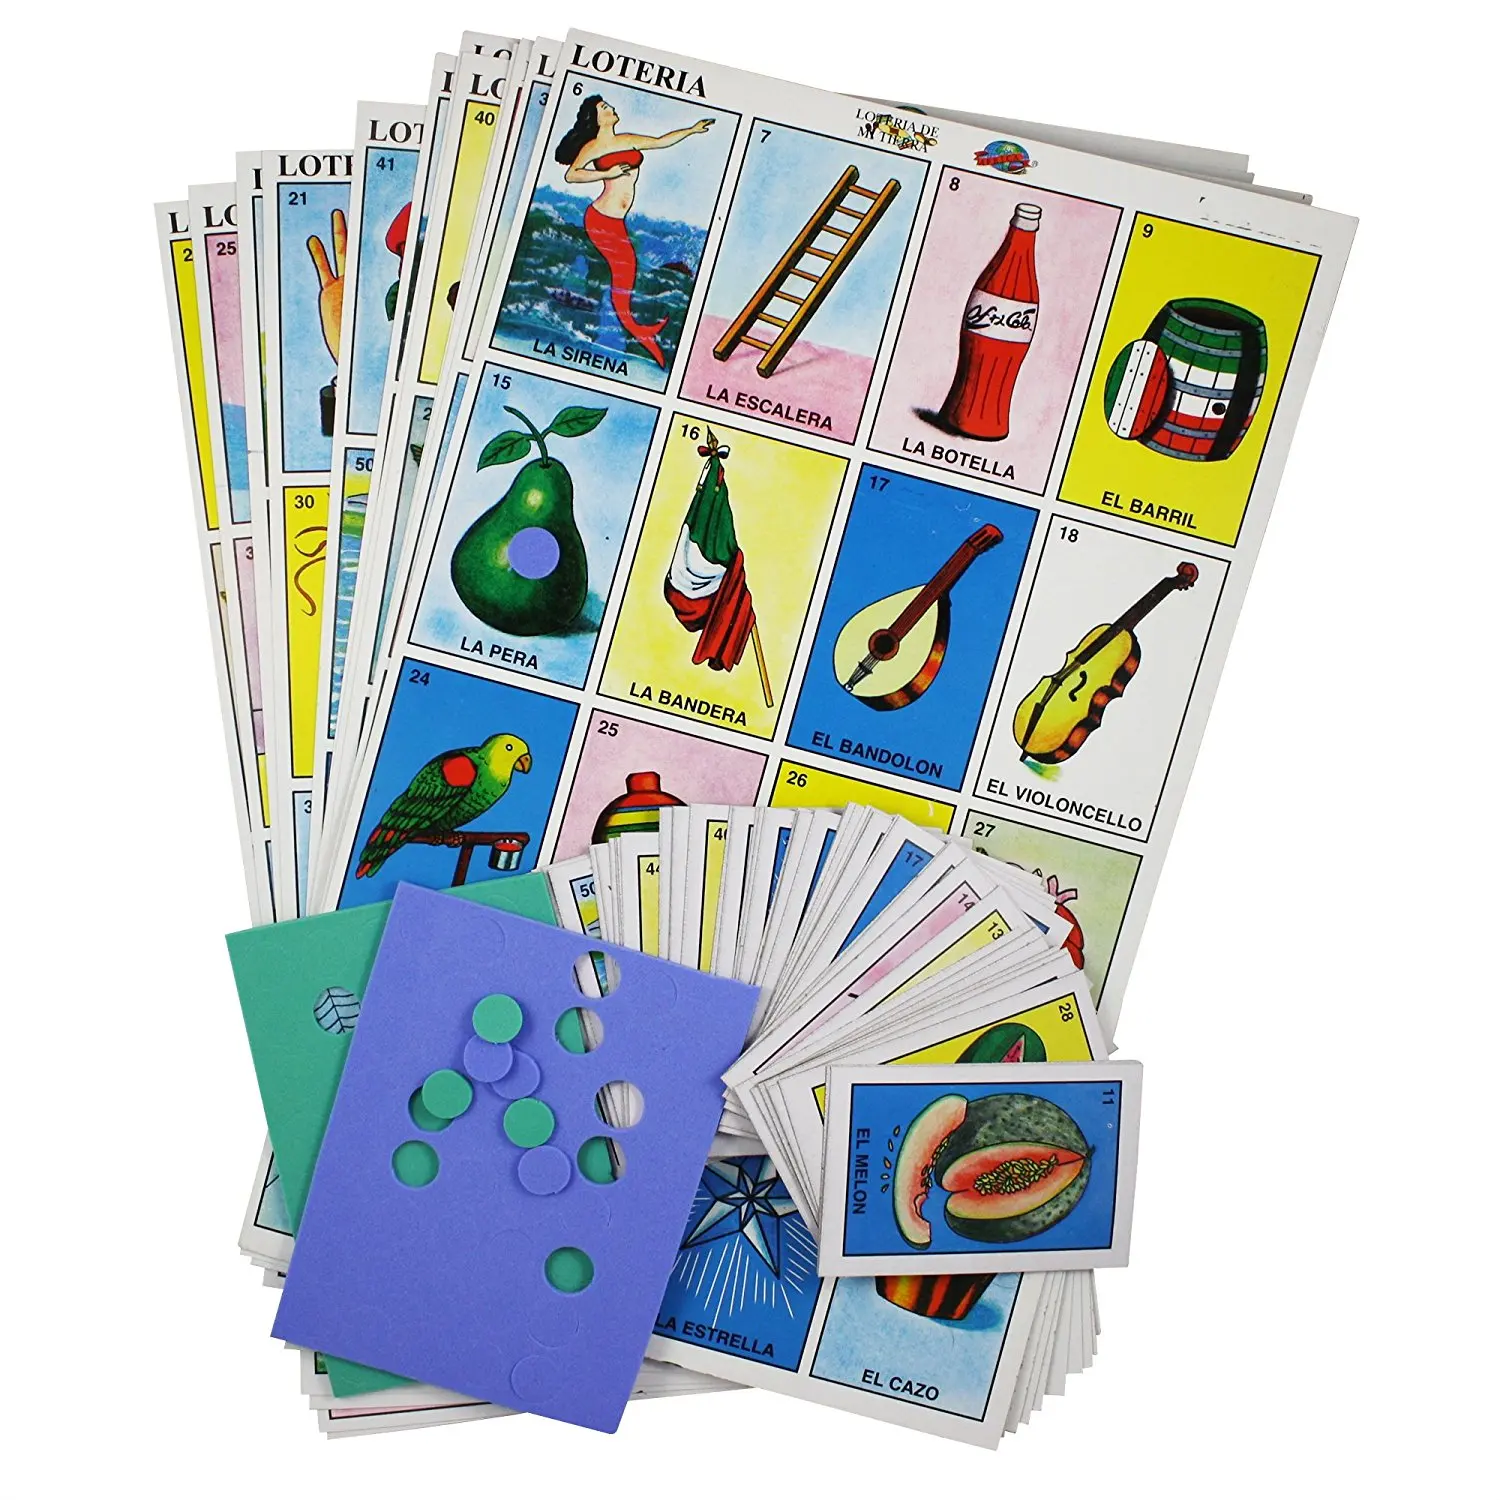 Free loteria deck of cards